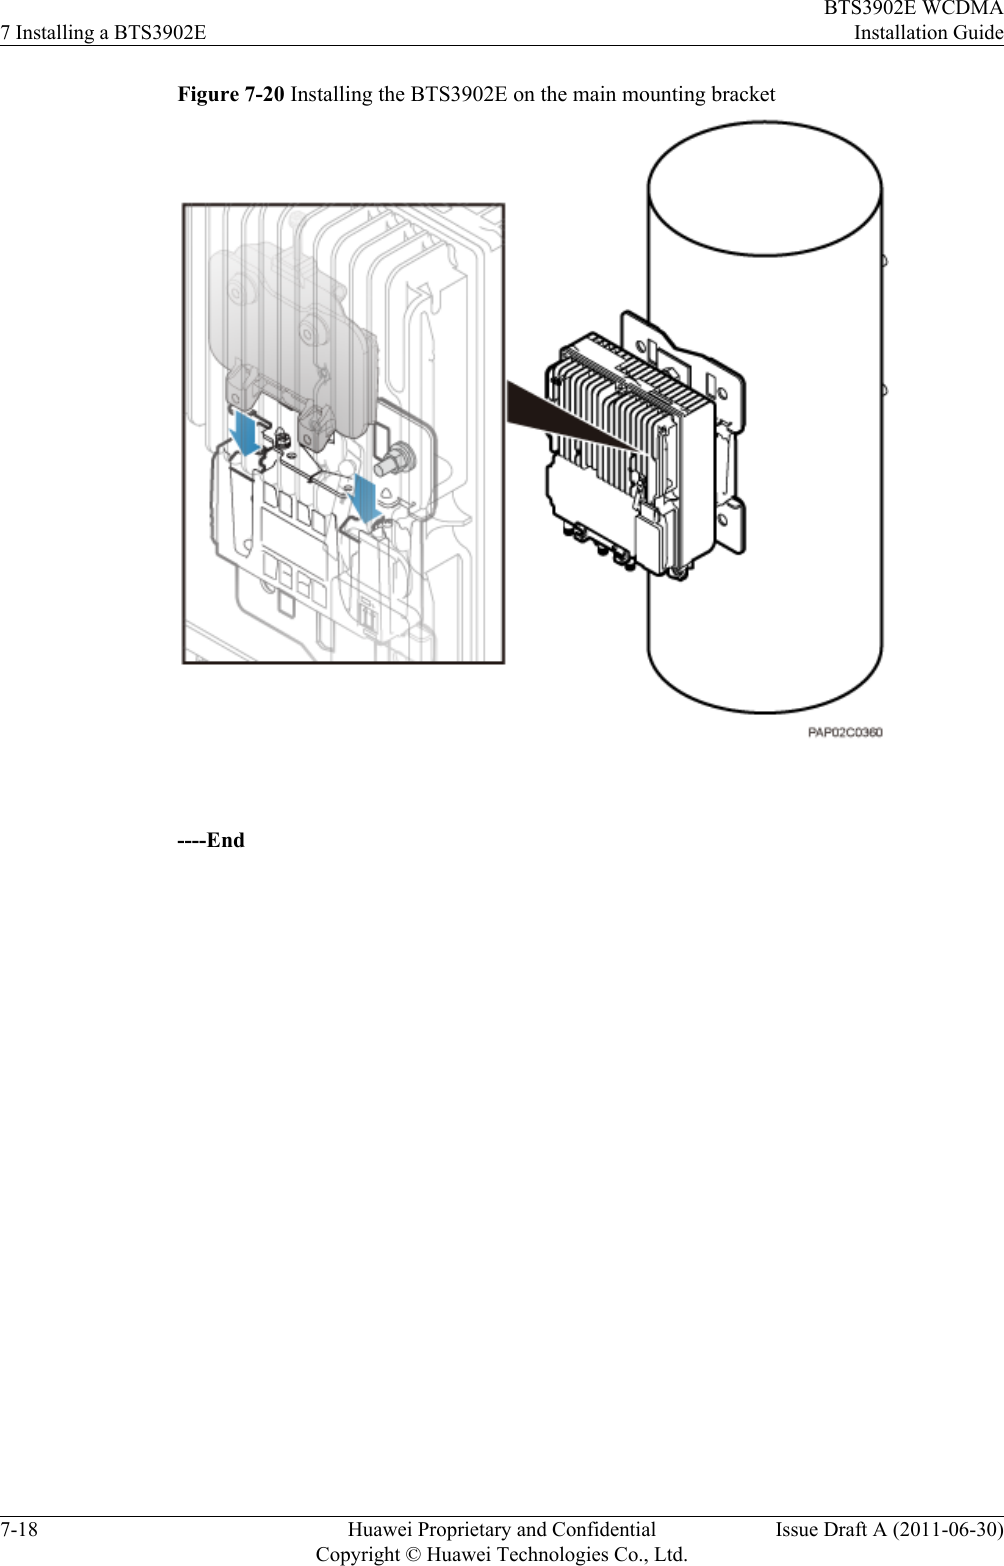 Figure 7-20 Installing the BTS3902E on the main mounting bracket ----End7 Installing a BTS3902EBTS3902E WCDMAInstallation Guide7-18 Huawei Proprietary and ConfidentialCopyright © Huawei Technologies Co., Ltd.Issue Draft A (2011-06-30)